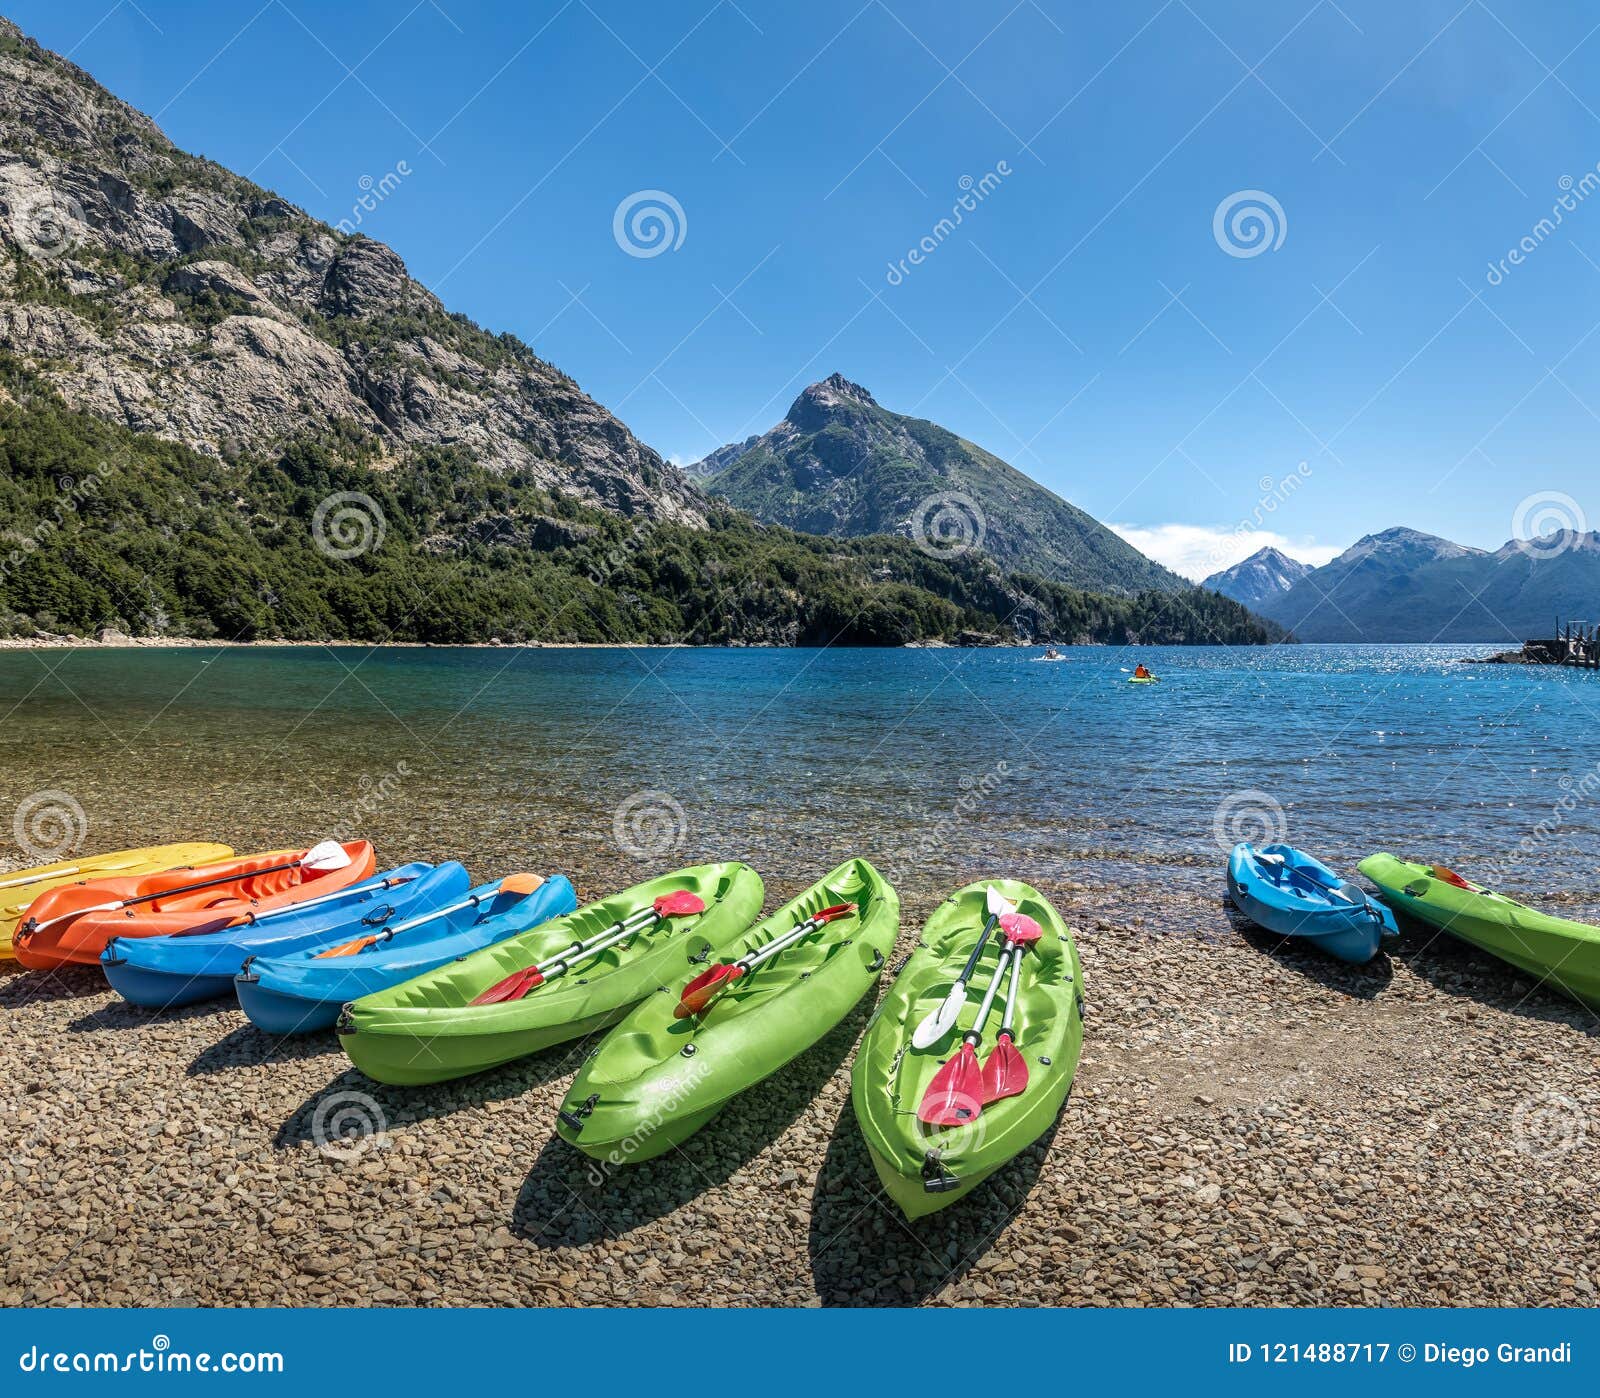 colorful kayaks in a lake surrounded by mountains at bahia lopez in circuito chico - bariloche, patagonia, argentina